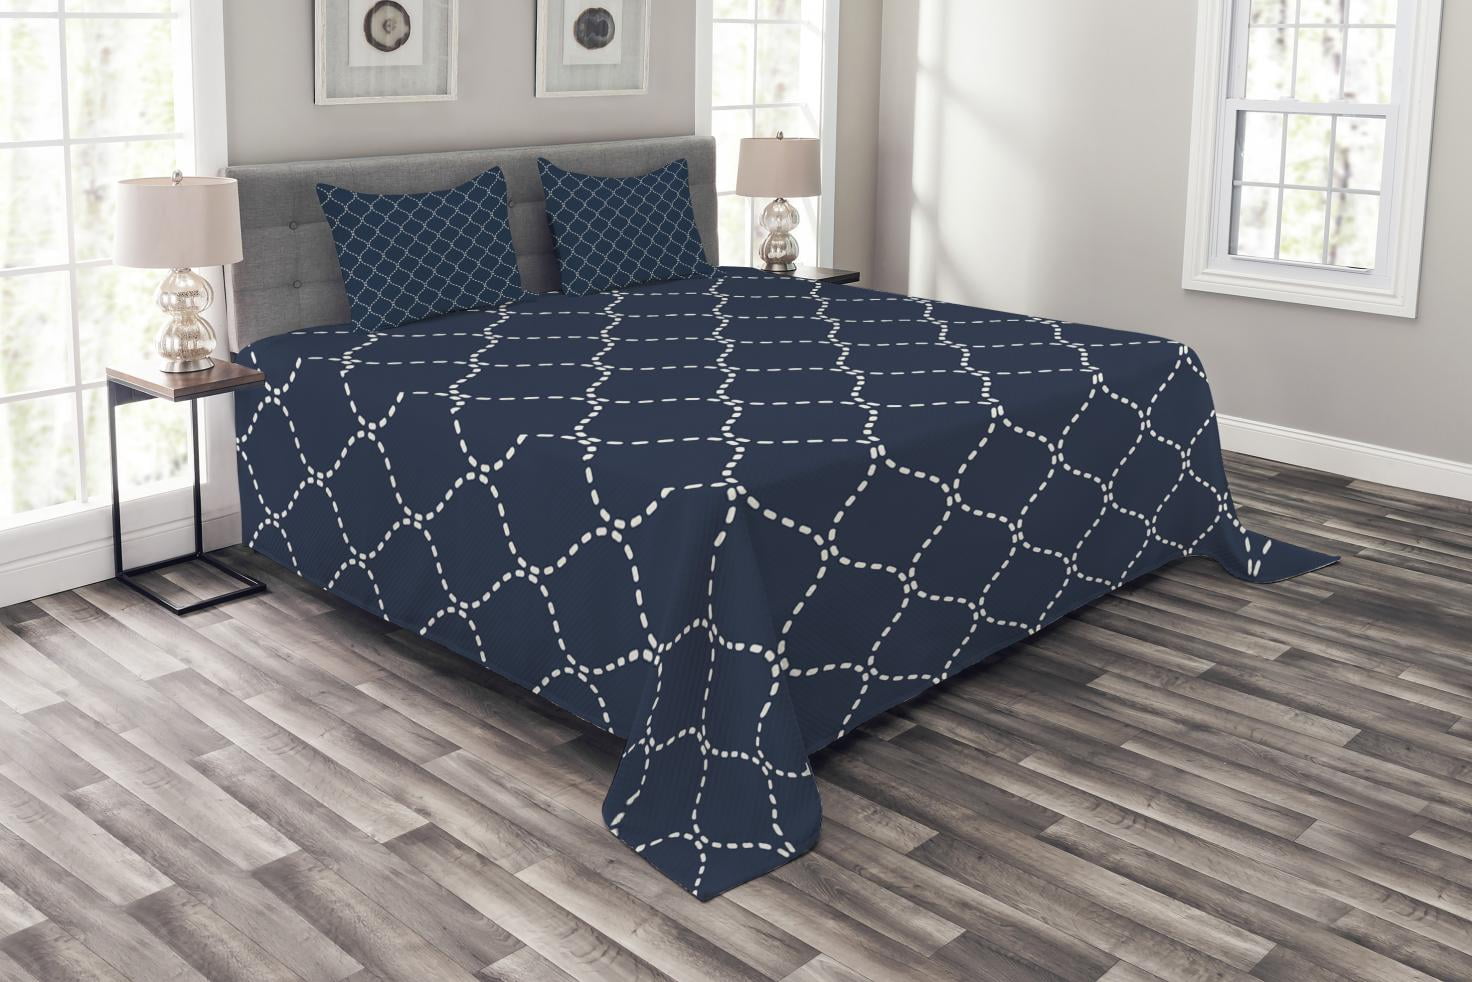 Details about   Geometric Quilted Bedspread & Pillow Shams Set Vertical Square Lines Print 